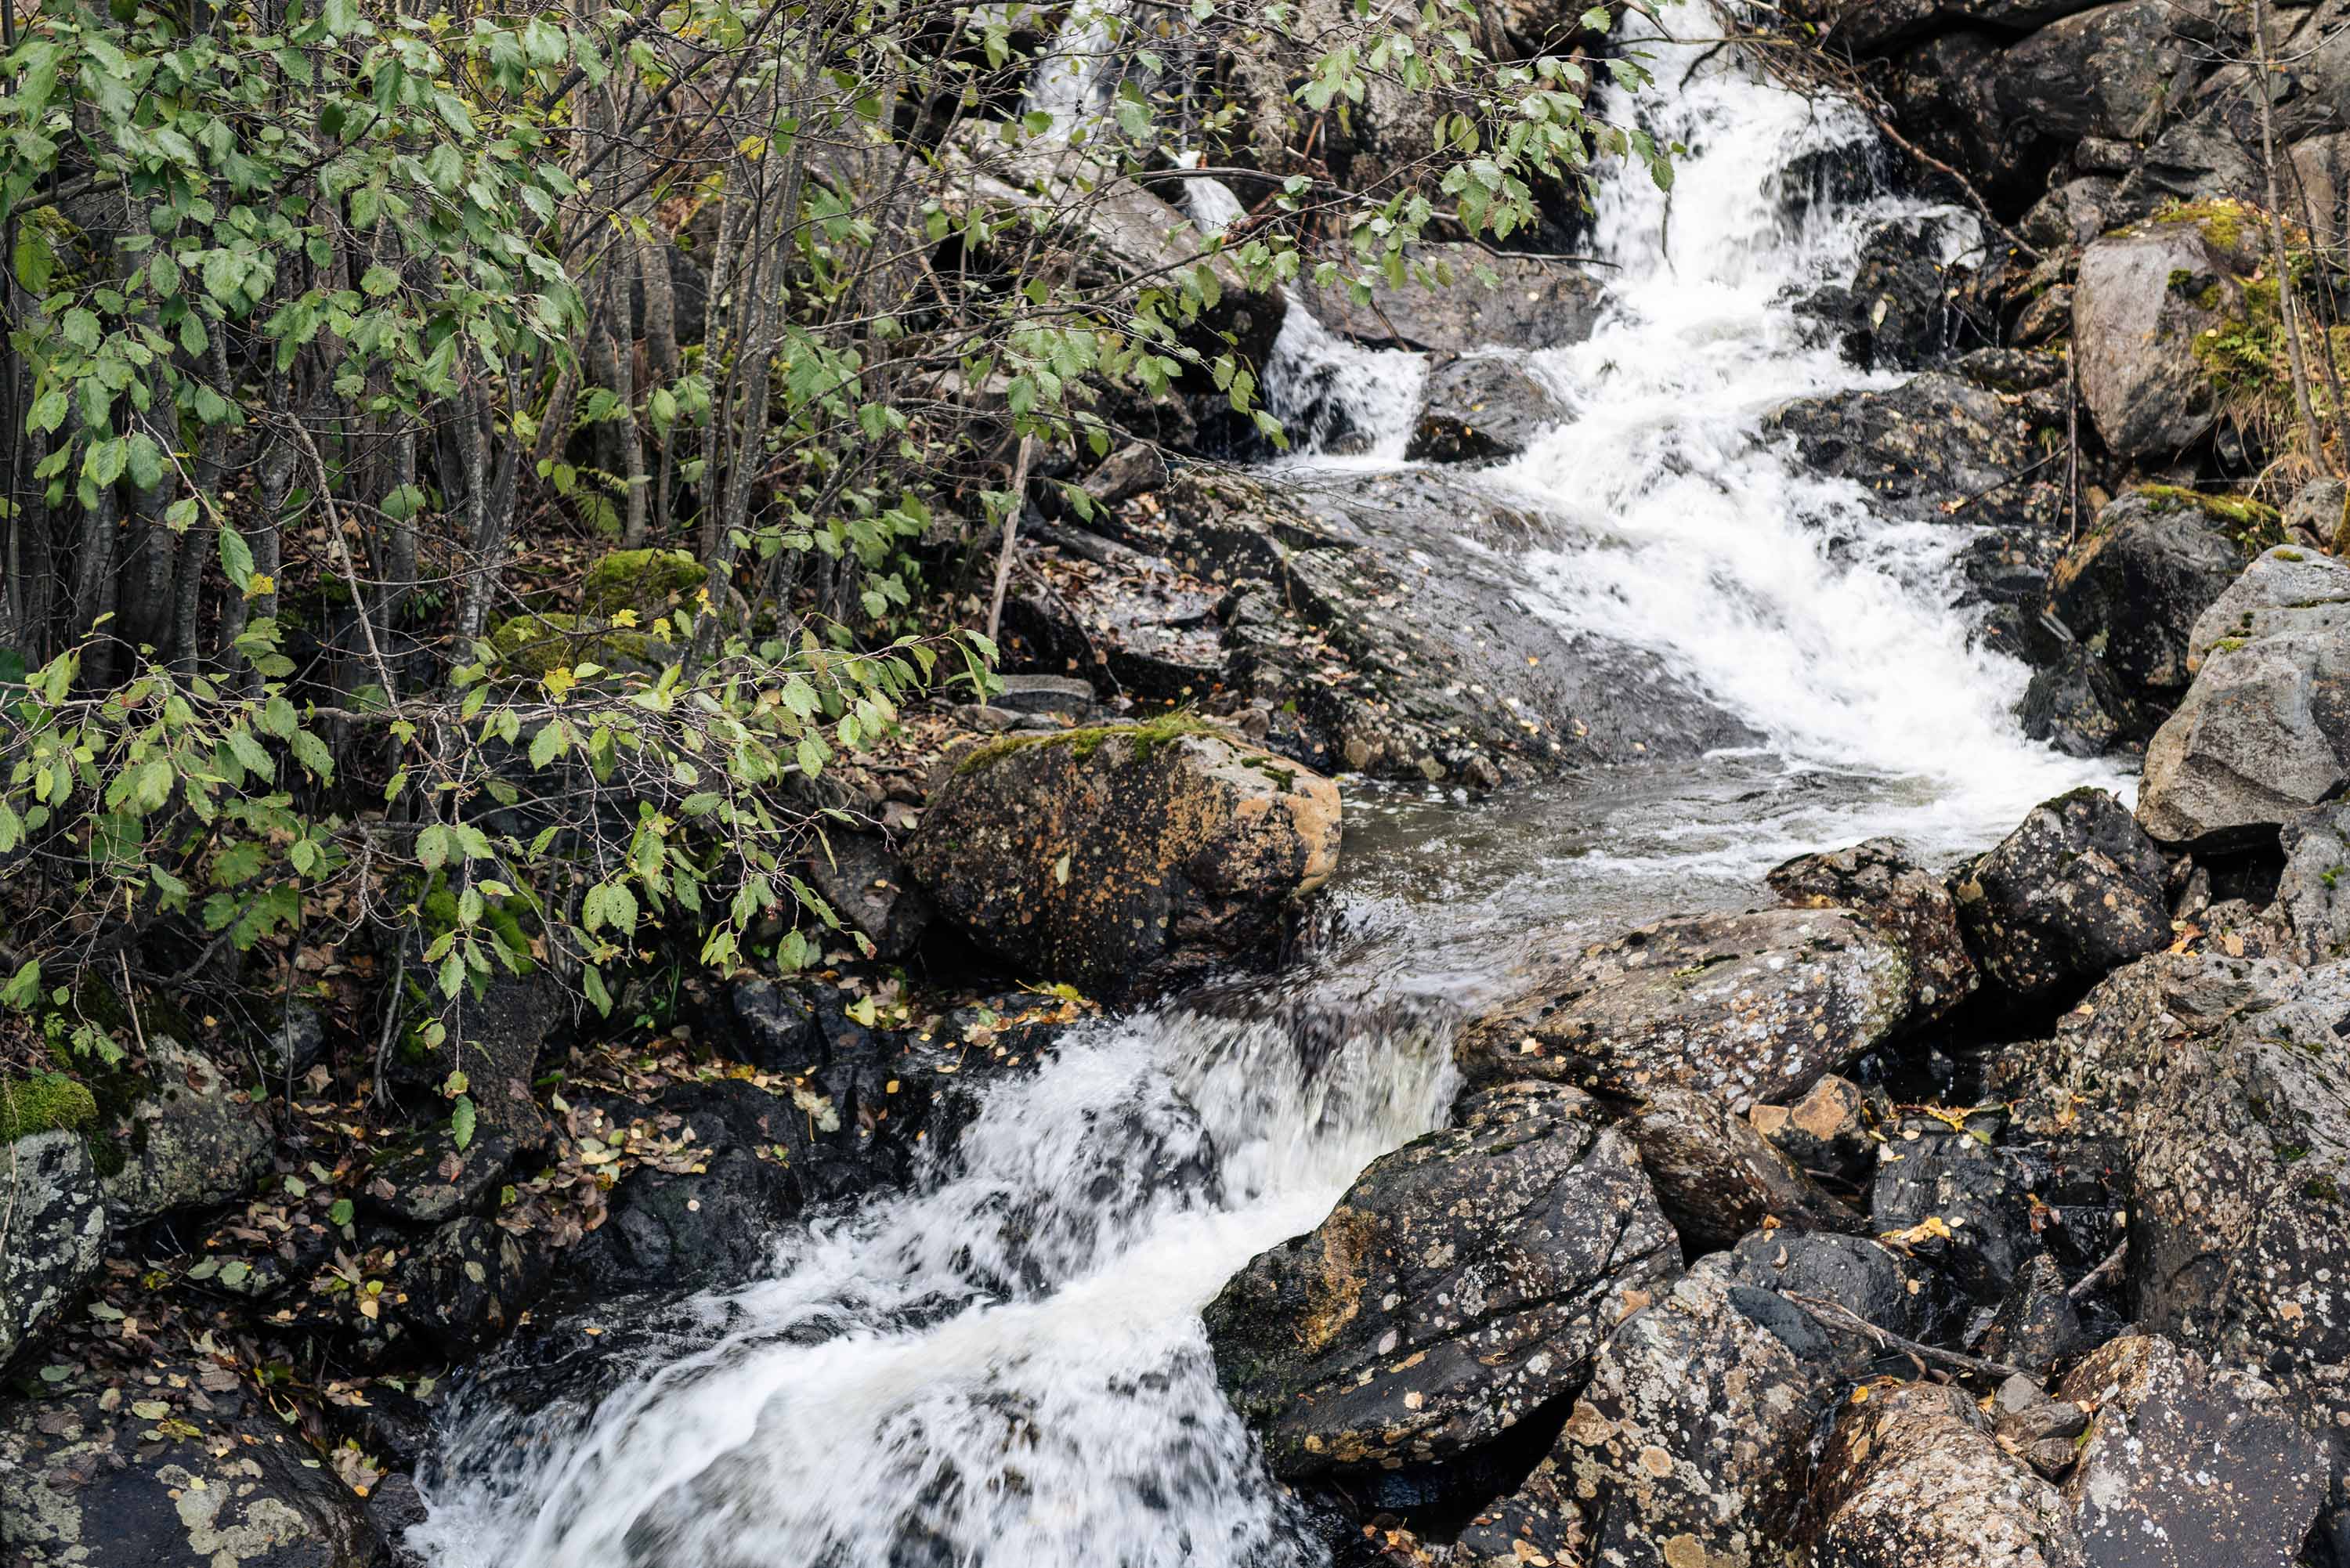 A stream flowing over rocks surrounded by greenery. The water is white and frothy, indicating it’s moving rapidly.